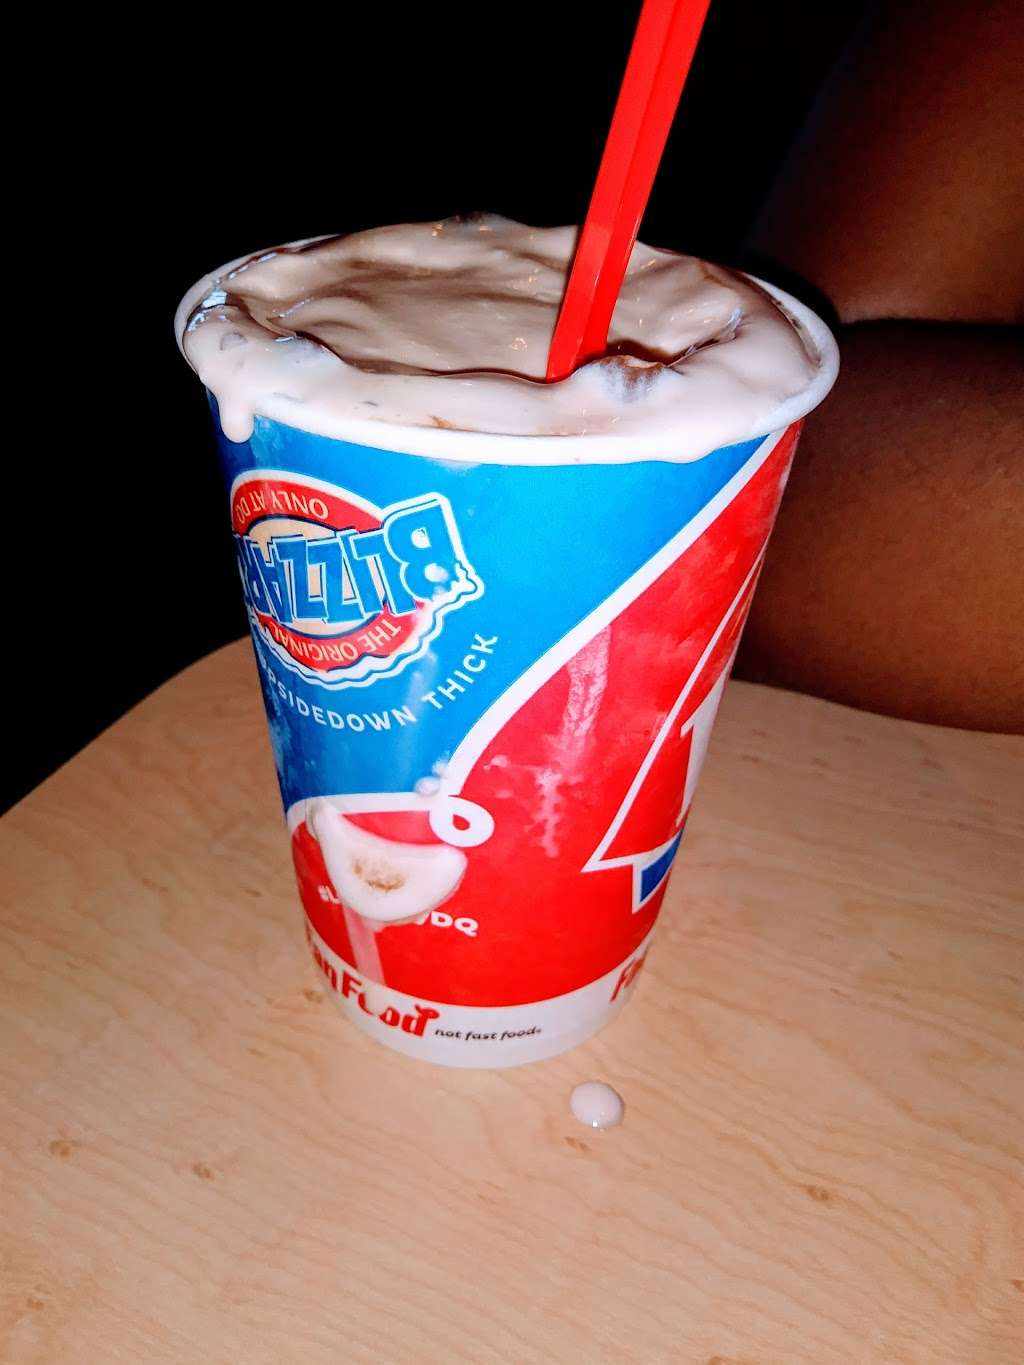 Dairy Queen Grill & Chill | 9072 Middleford Rd, Seaford, DE 19973 | Phone: (302) 628-8071